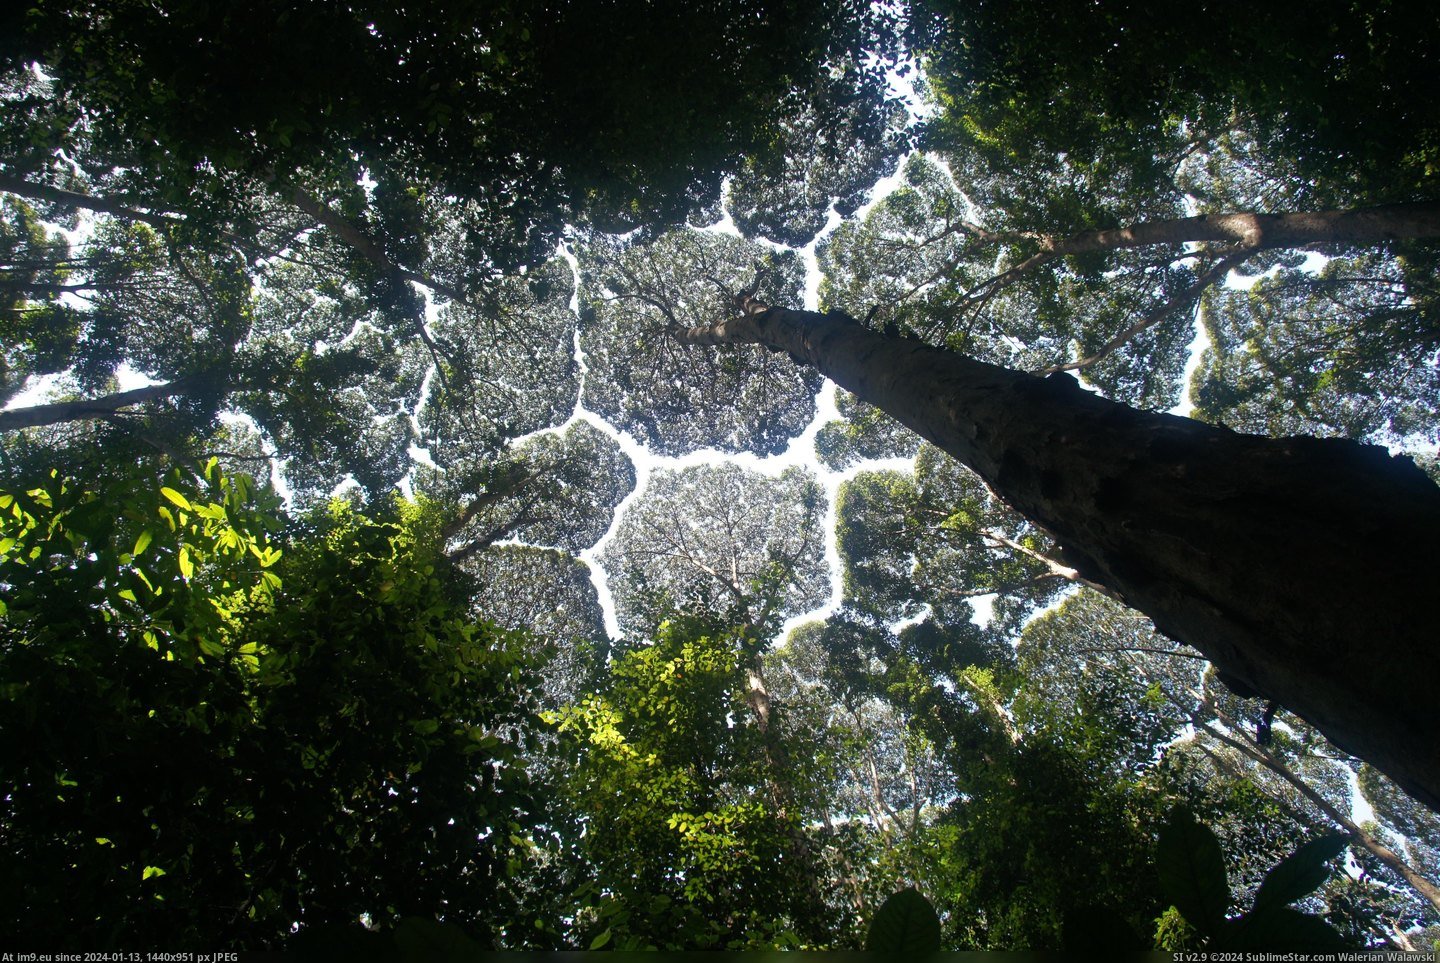 #Natural #Called #Touch #Phenomenon #Shyness #Trees #Crown #Eachother [Pics] The canopies of these trees don't ever touch eachother, it's a natural phenomenon called 'crown shyness'. Pic. (Изображение из альбом My r/PICS favs))